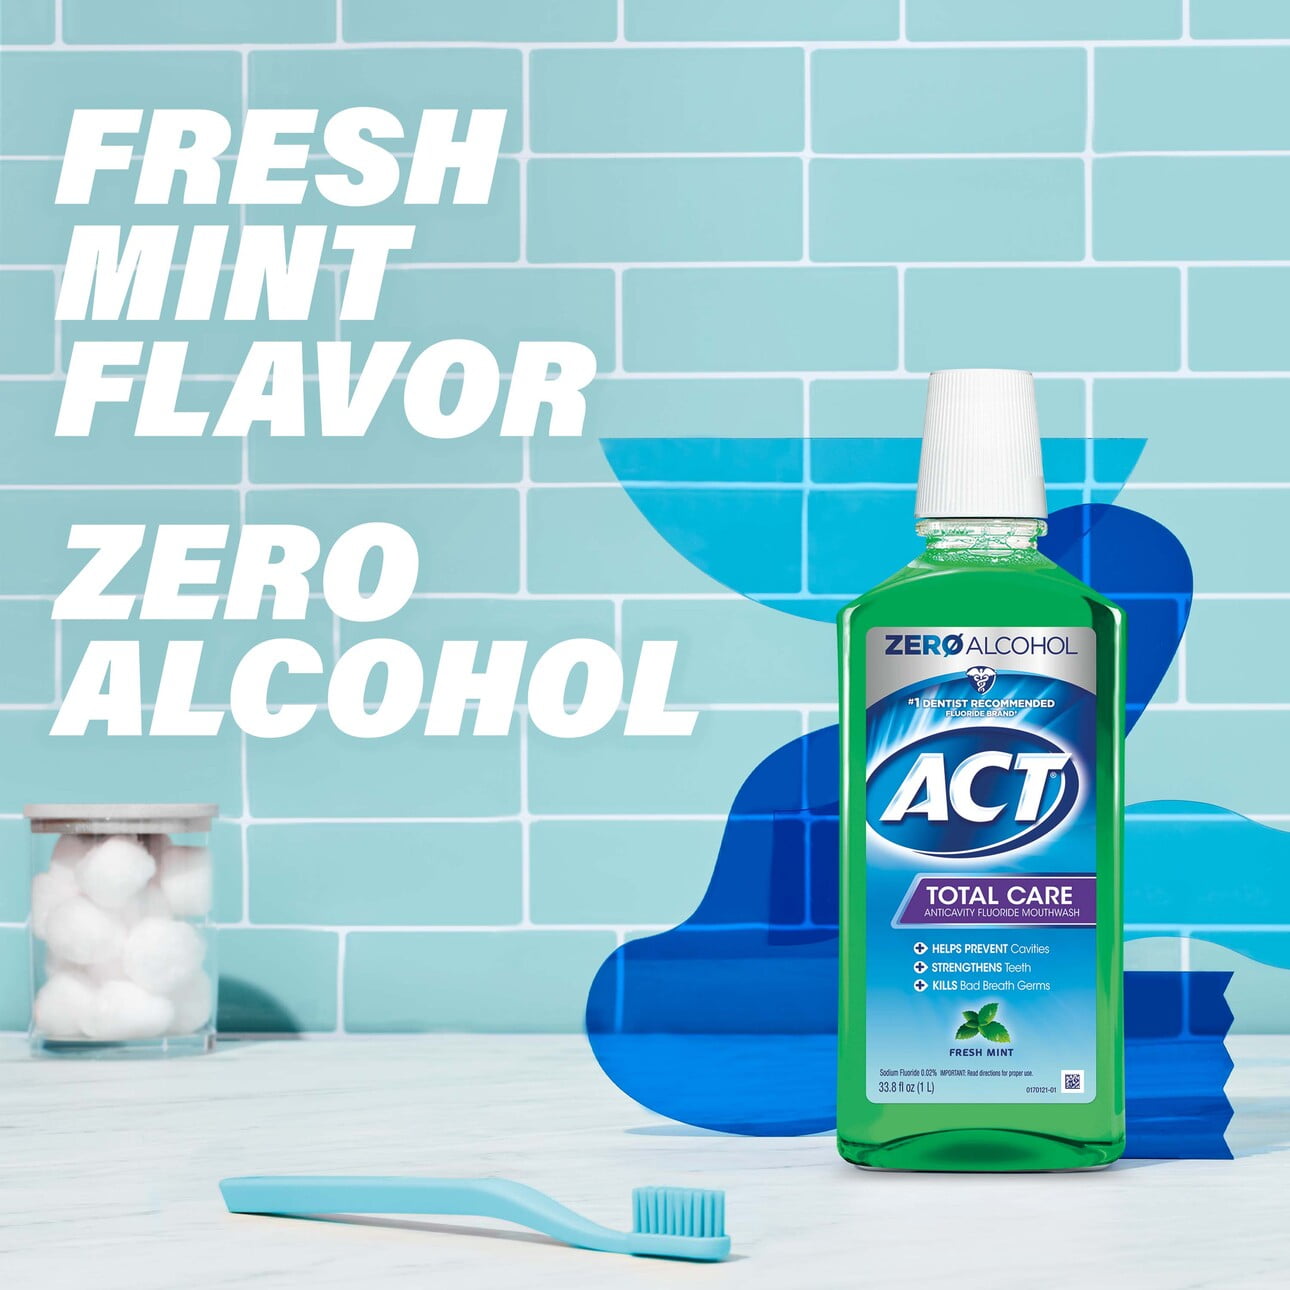 ACT Total Care Anticavity Fluoride Mouthwash, Alcohol Free Mouth Rinse for Adults, Fresh Mint, 33.8 fl oz - image 5 of 11